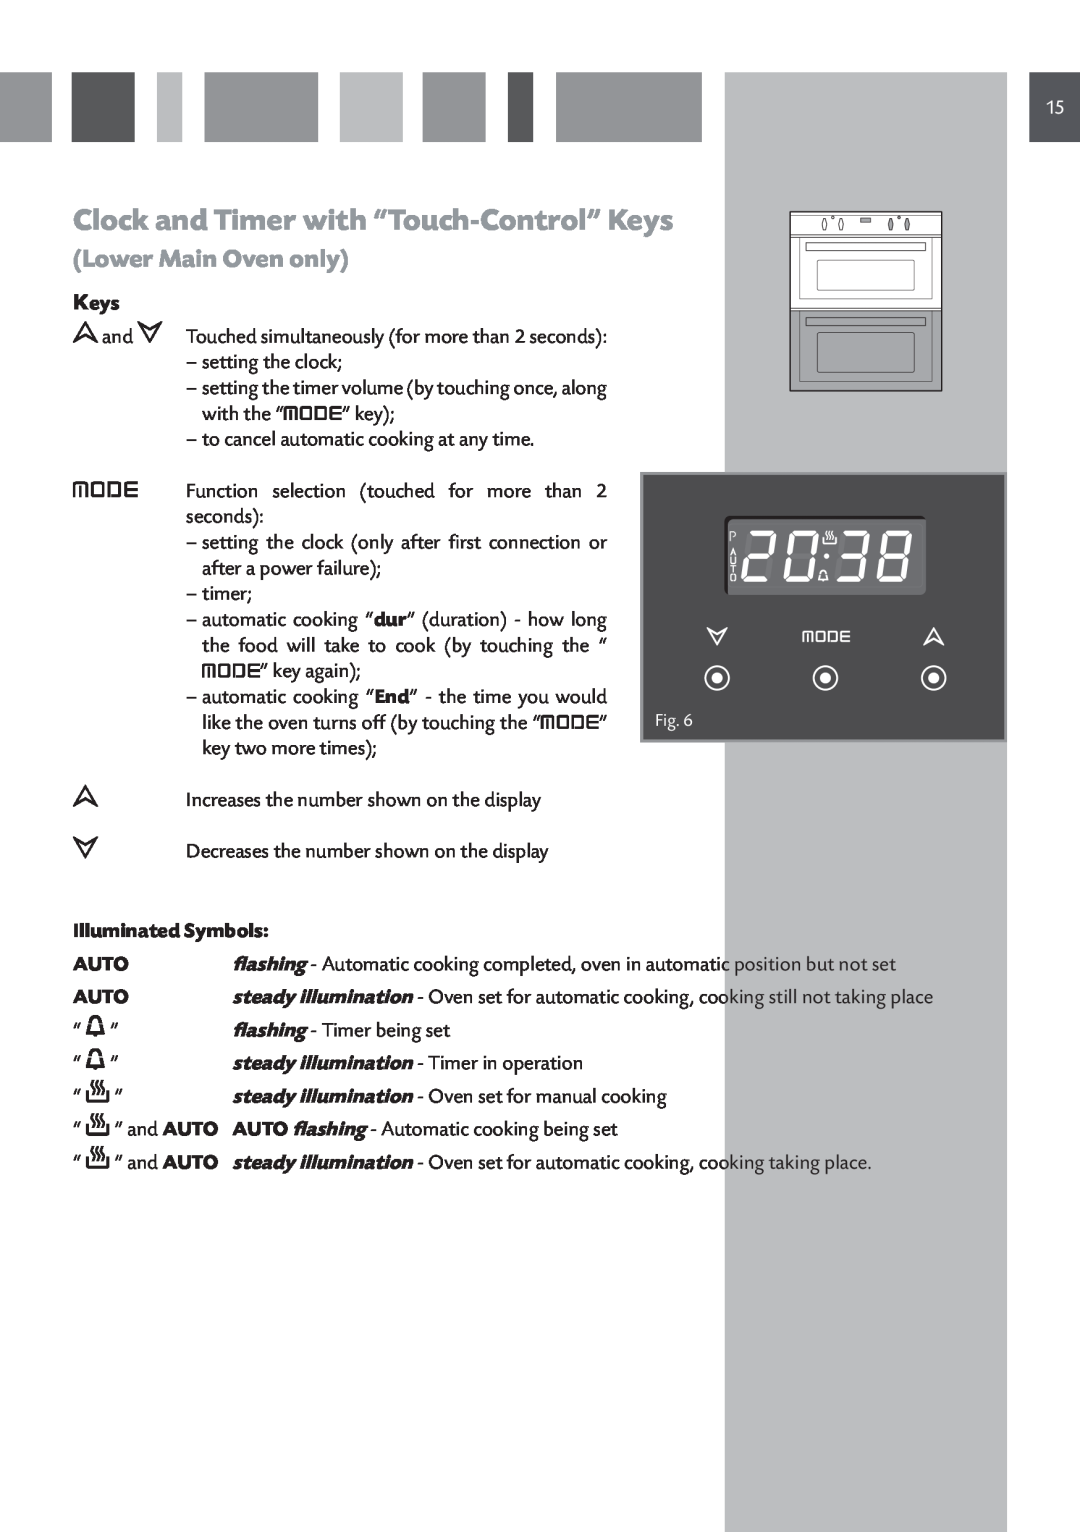 CDA DV 710 manual Clock and Timer with “Touch-Control” Keys, Illuminated Symbols, Lower Main Oven only, Auto 